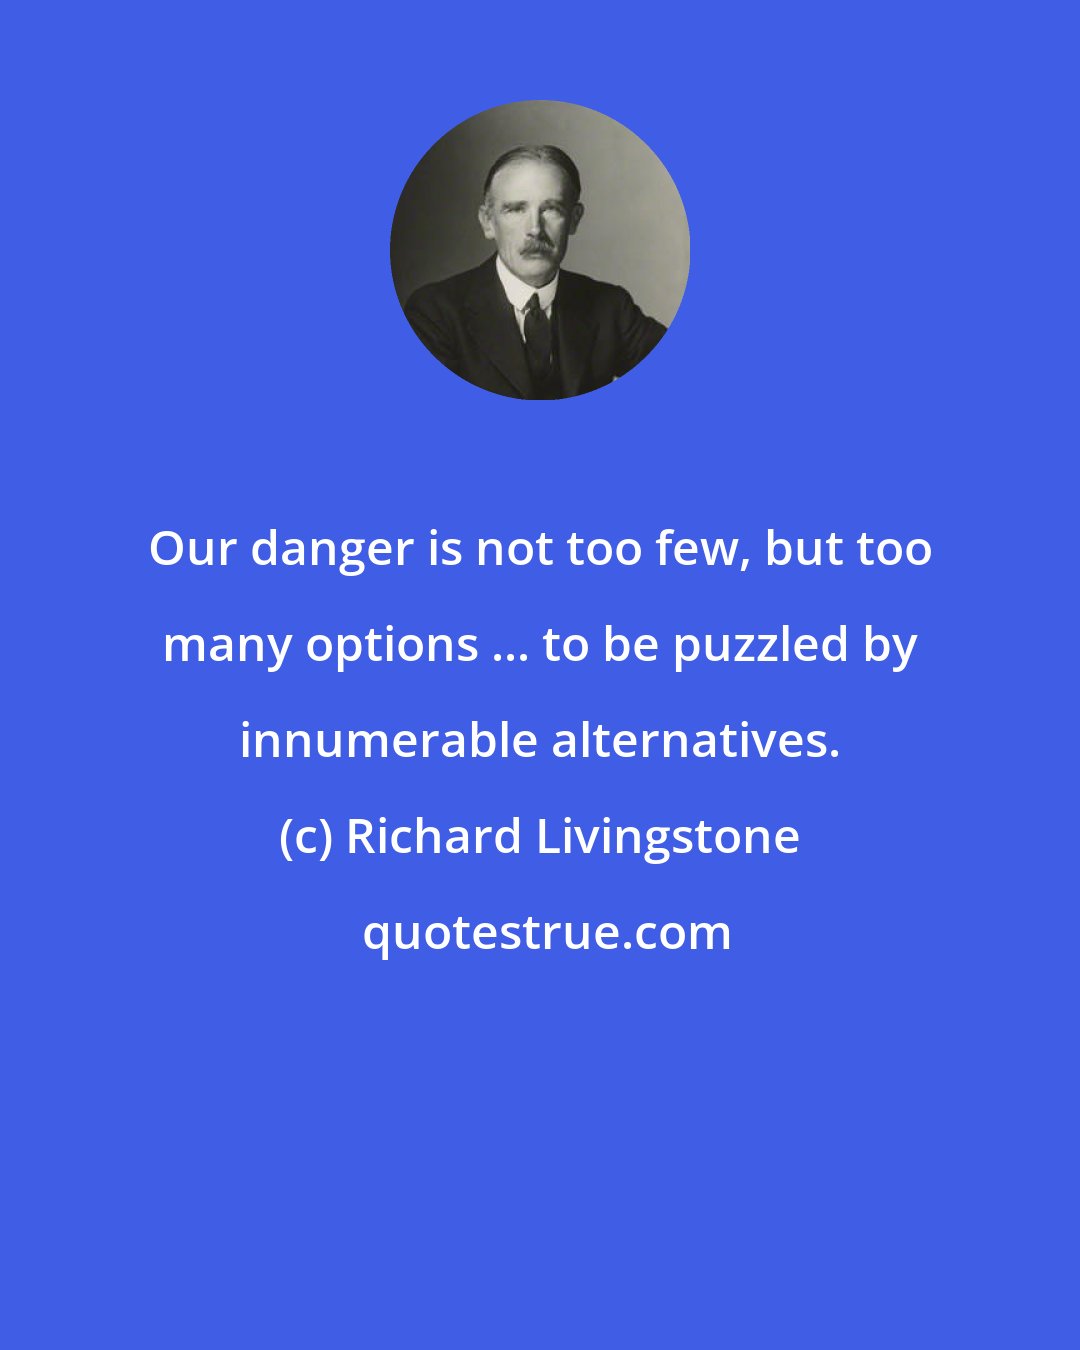 Richard Livingstone: Our danger is not too few, but too many options ... to be puzzled by innumerable alternatives.